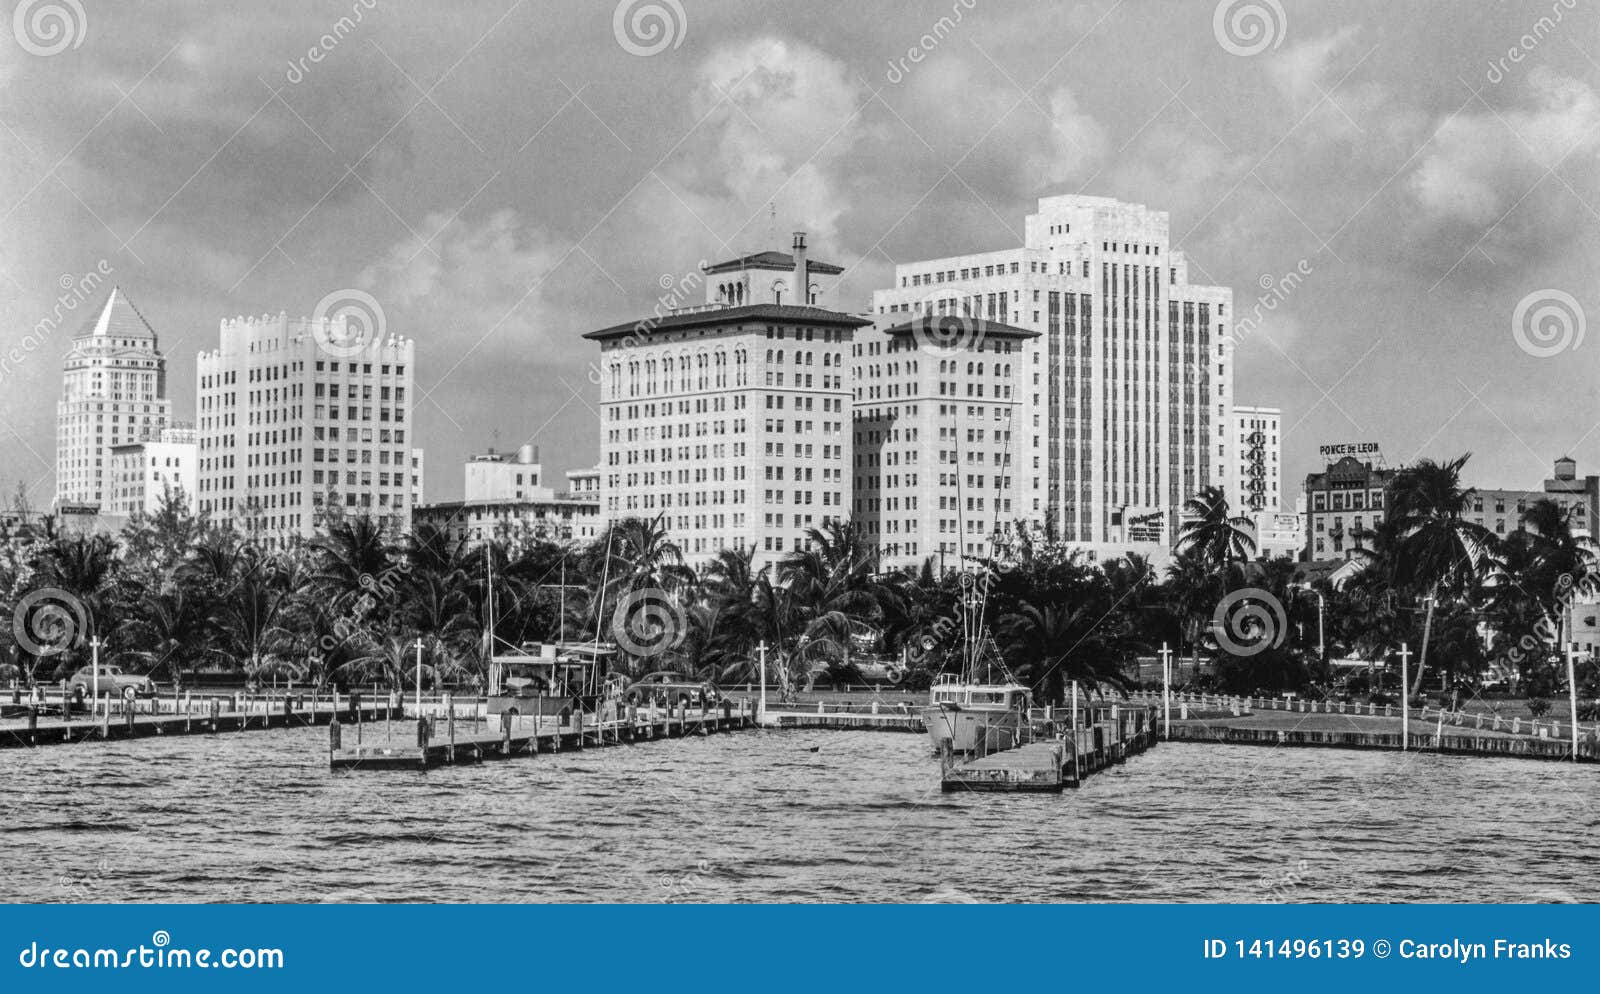 Downtown Miami Business Section 1950s Stock Image - Image of historical, florida: 141496139